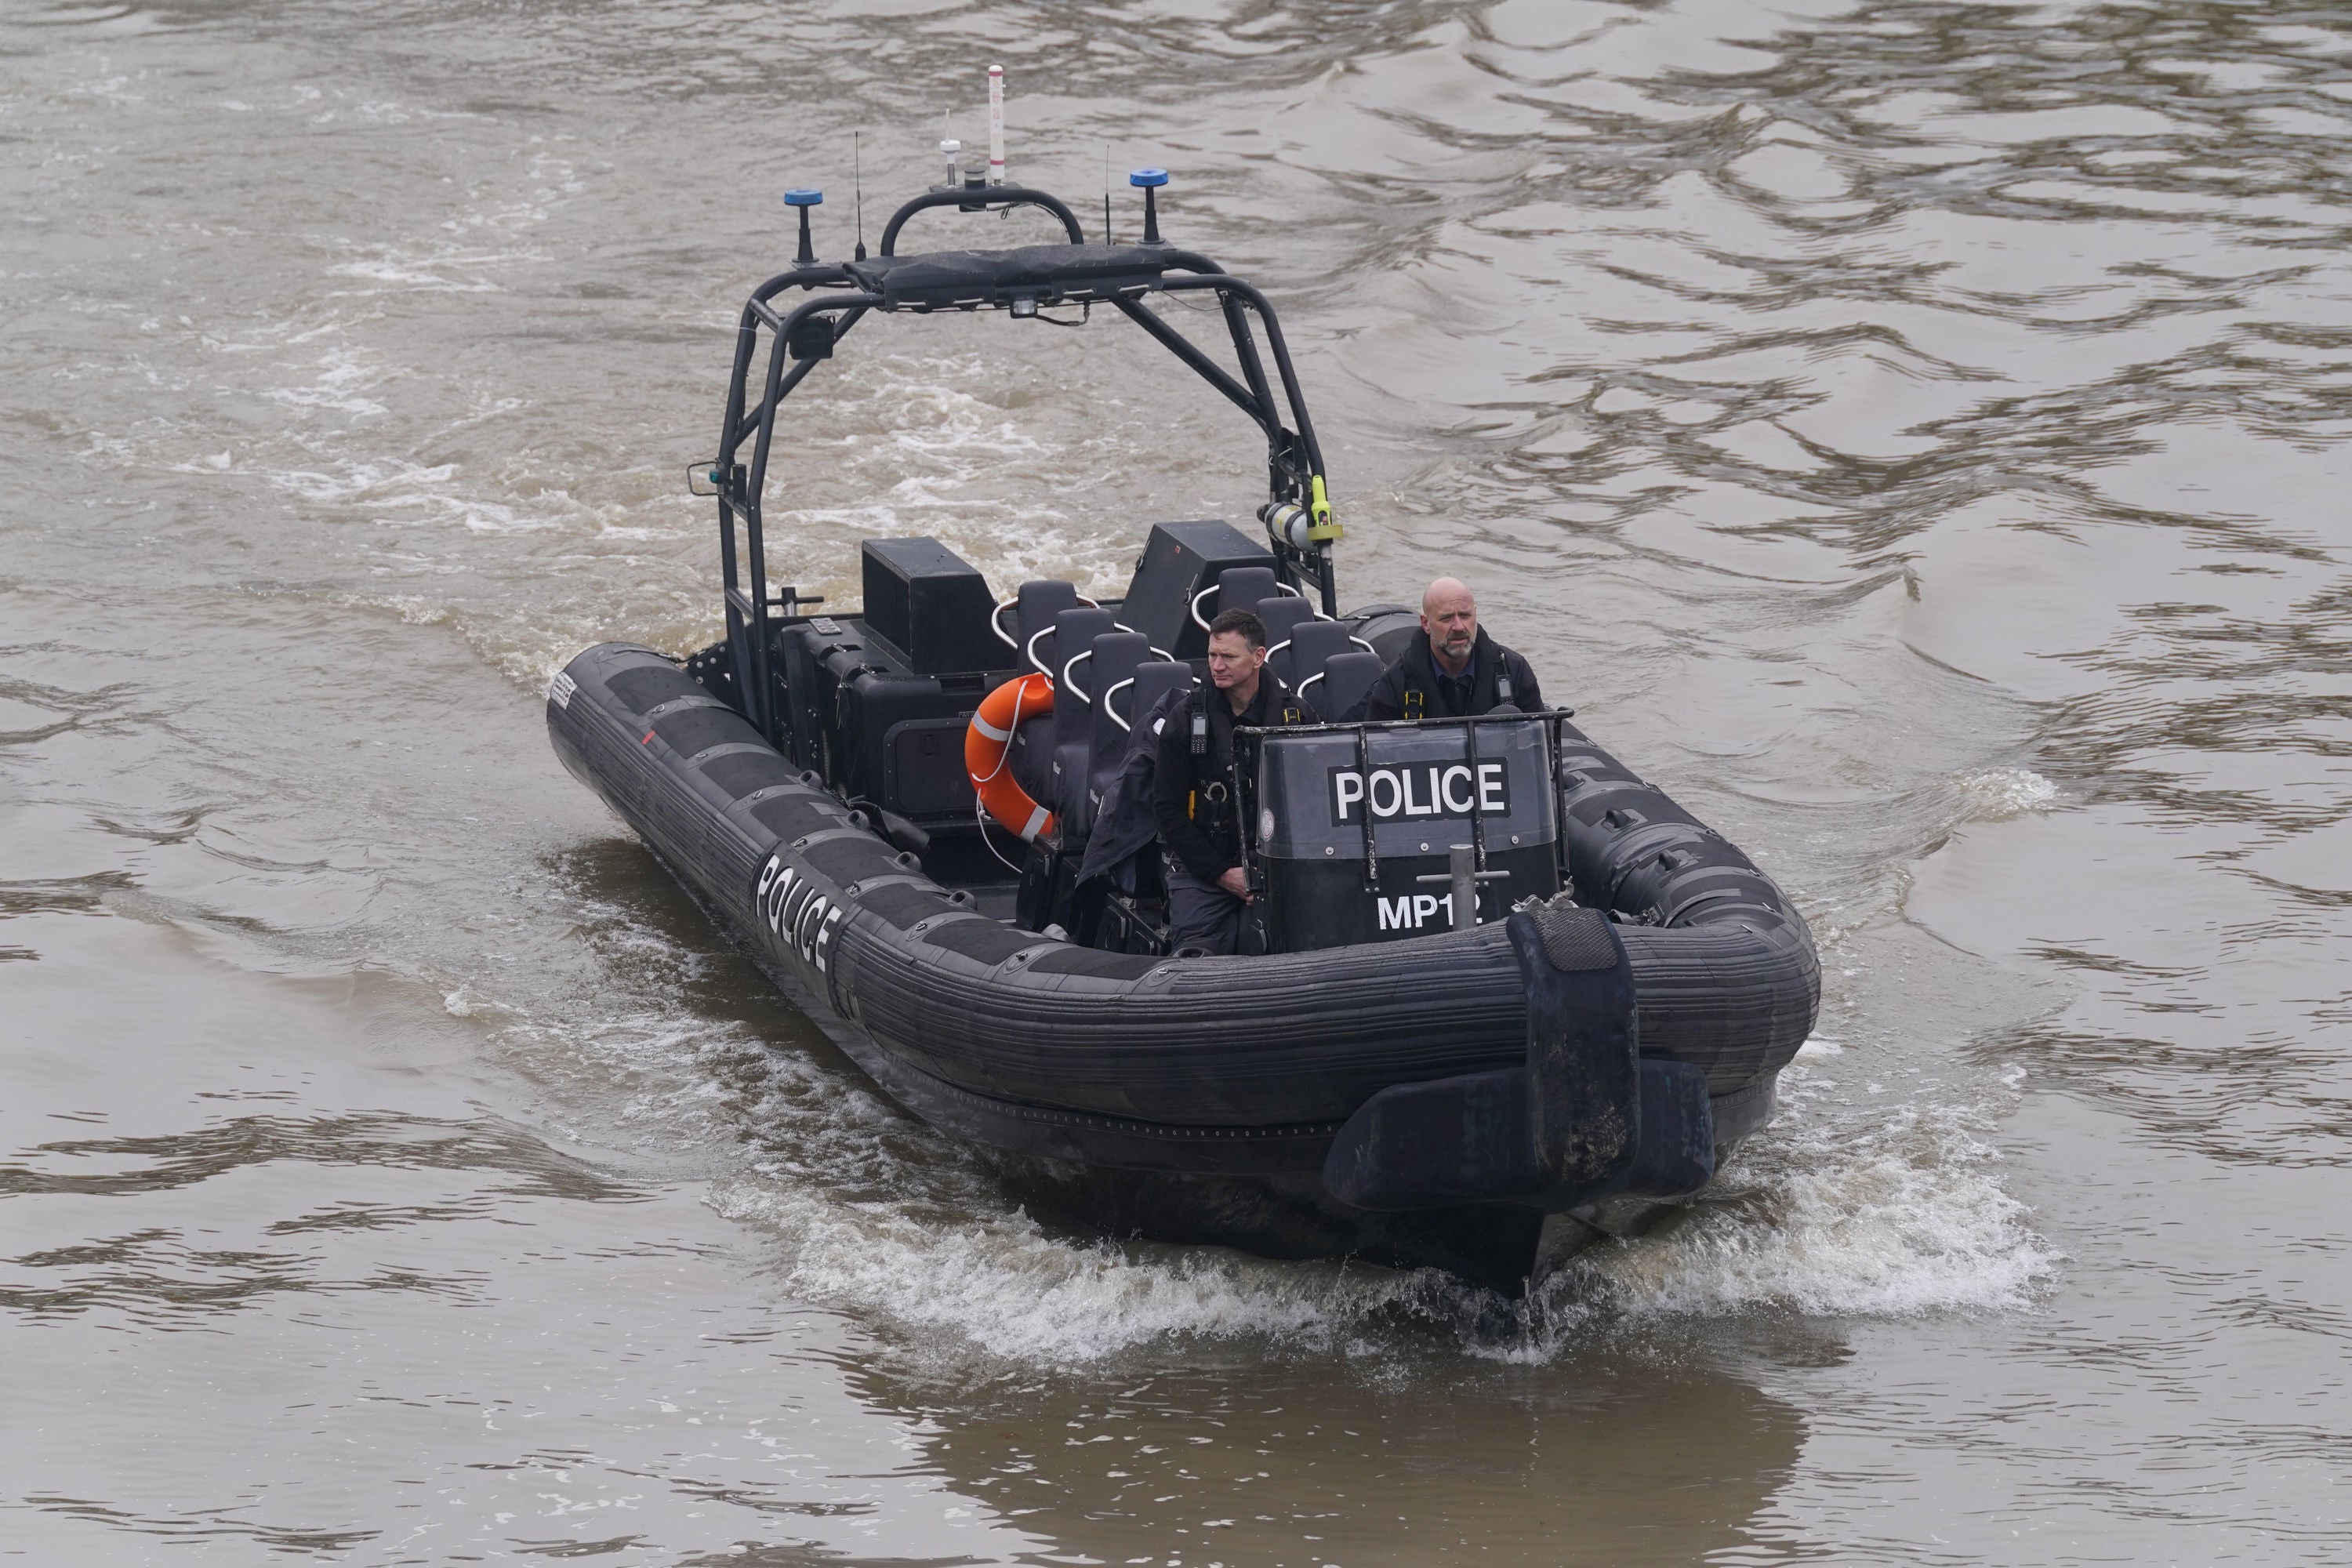 The Met’s marine policing unit searching for Ezedi near Chelsea Bridge